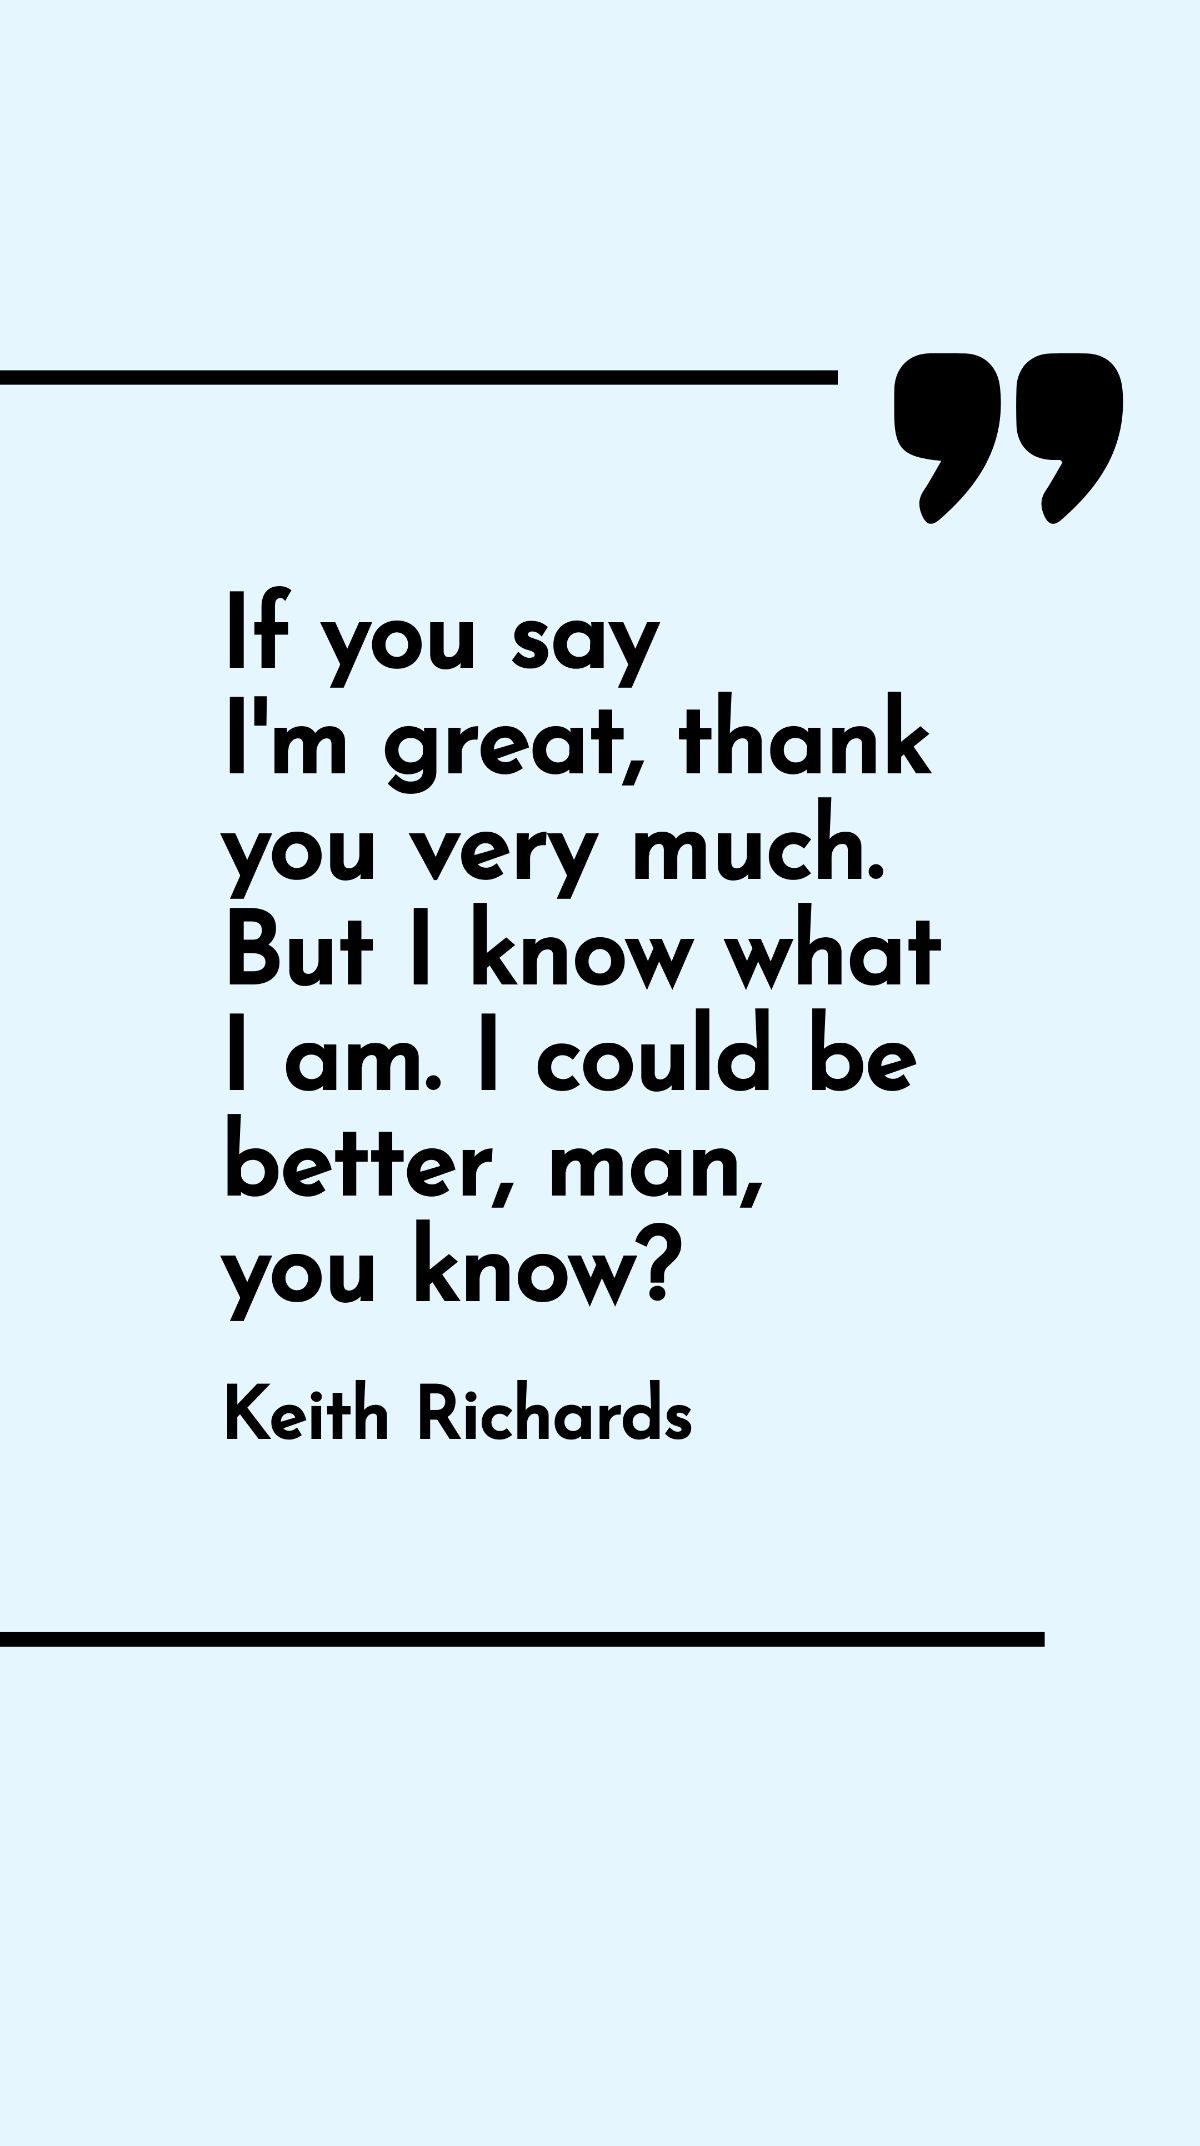 Keith Richards - If you say I'm great, thank you very much. But I know what I am. I could be better, man, you know? Template